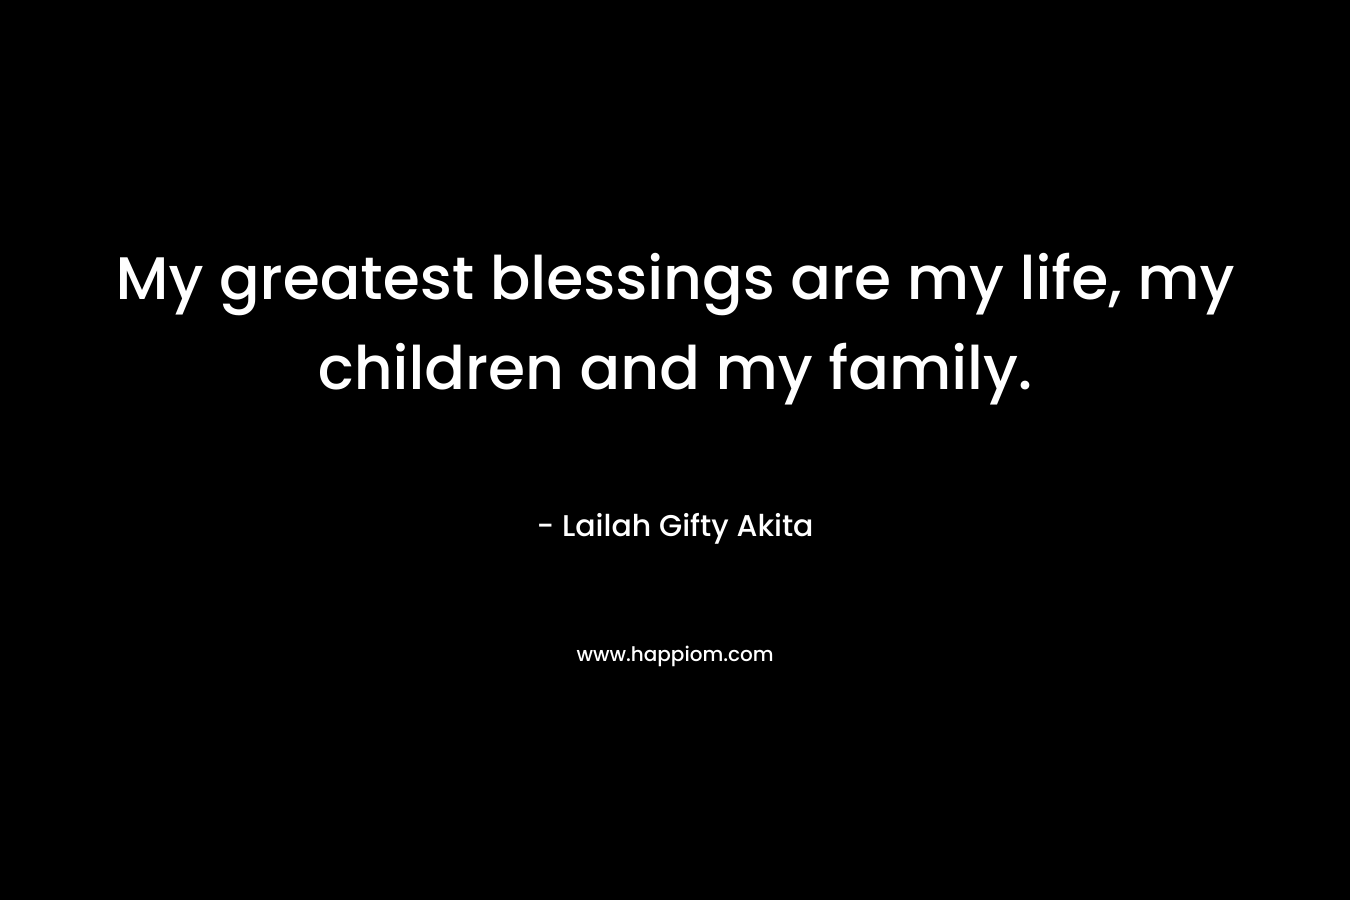 My greatest blessings are my life, my children and my family.